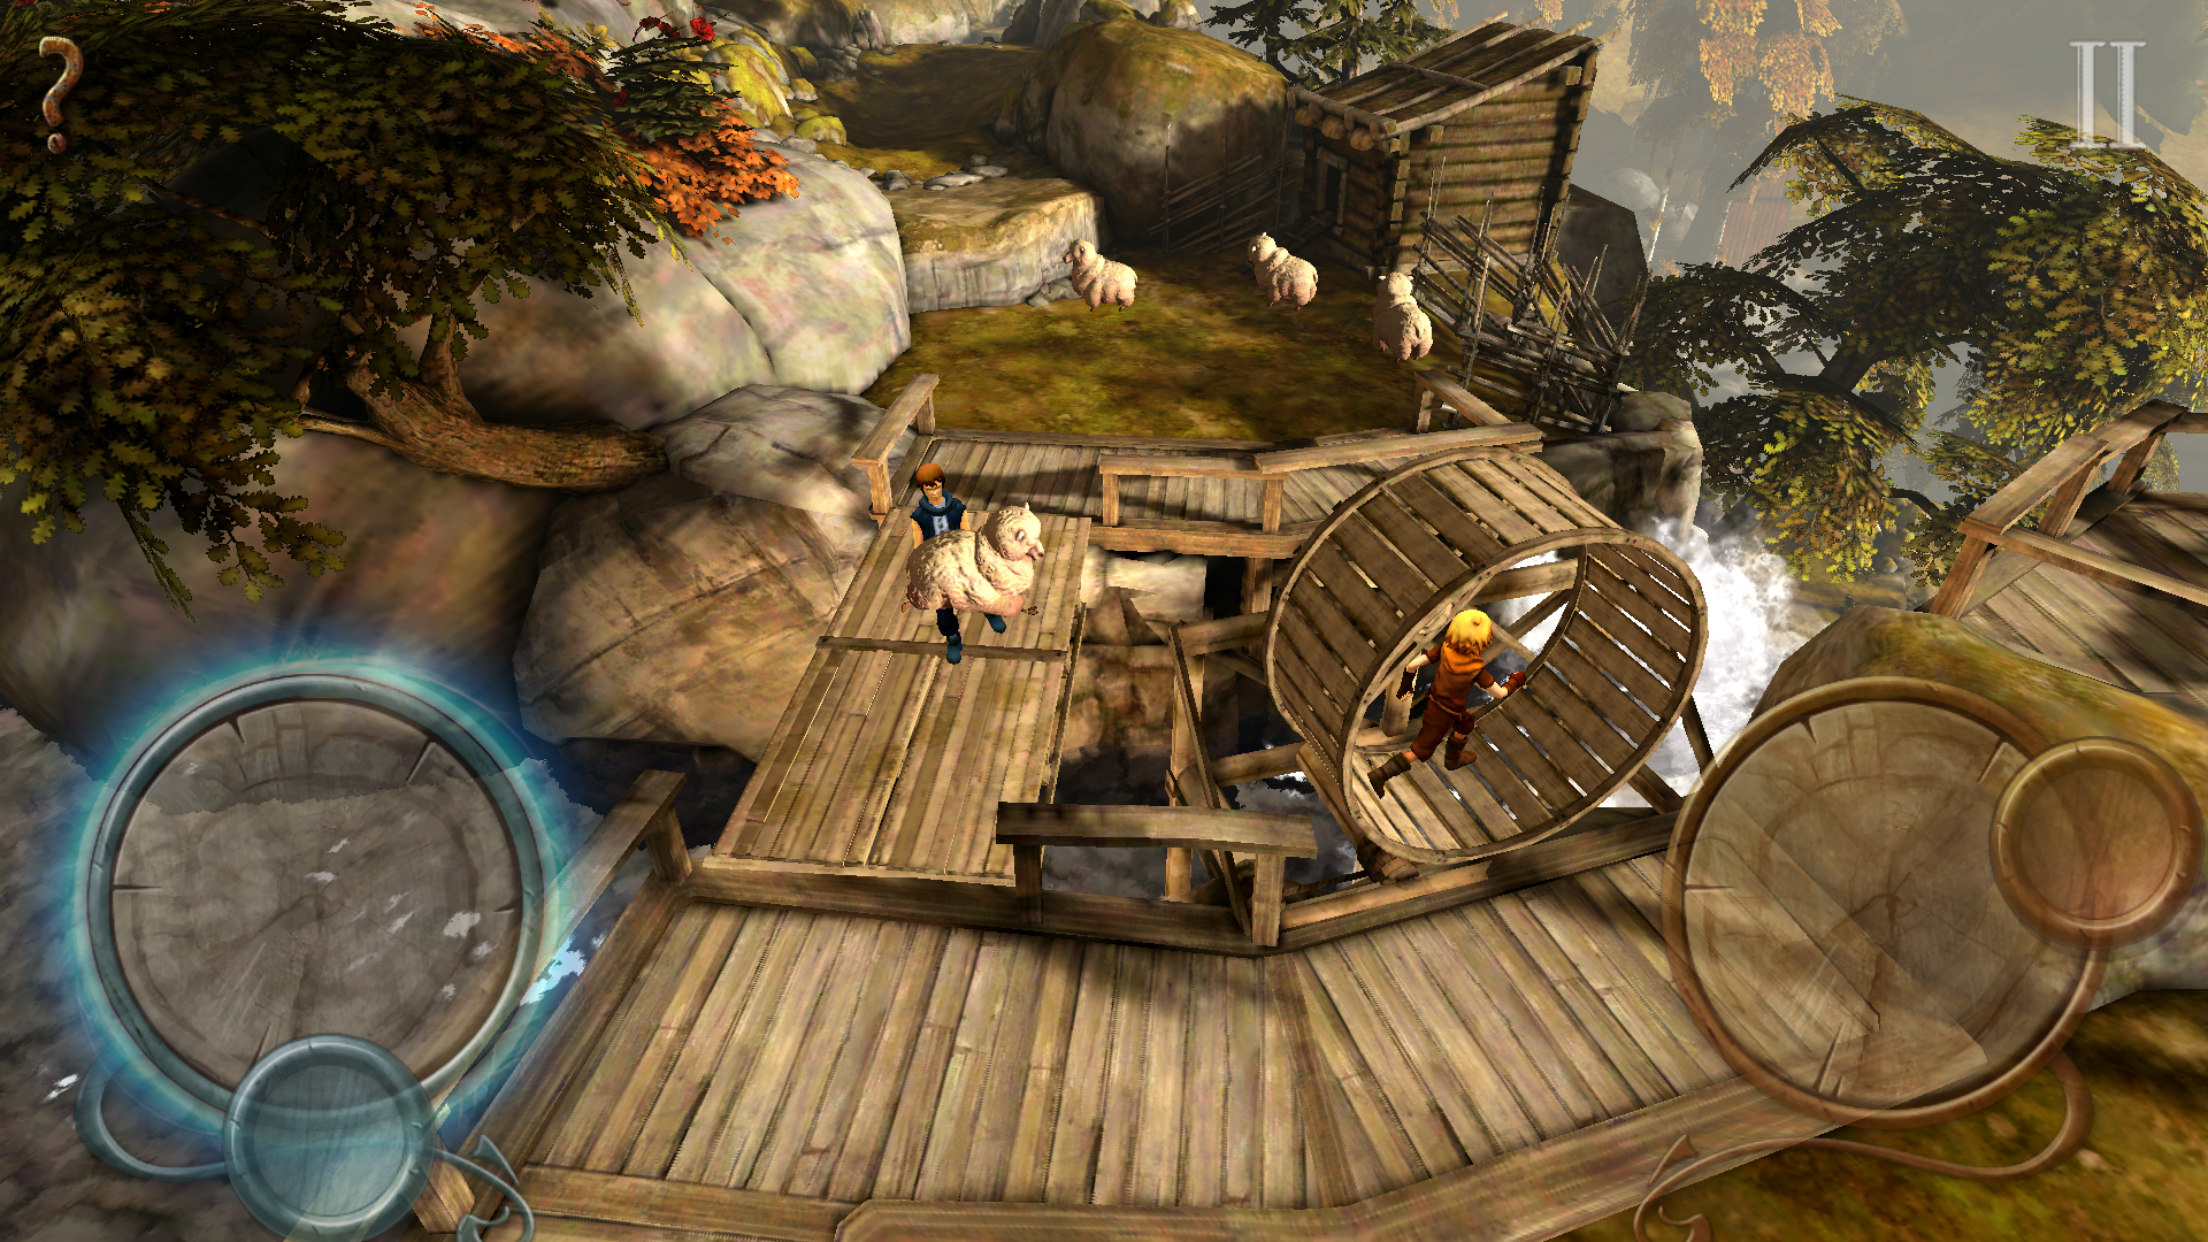 Screenshot 1 of Brothers: a Tale of two Sons 